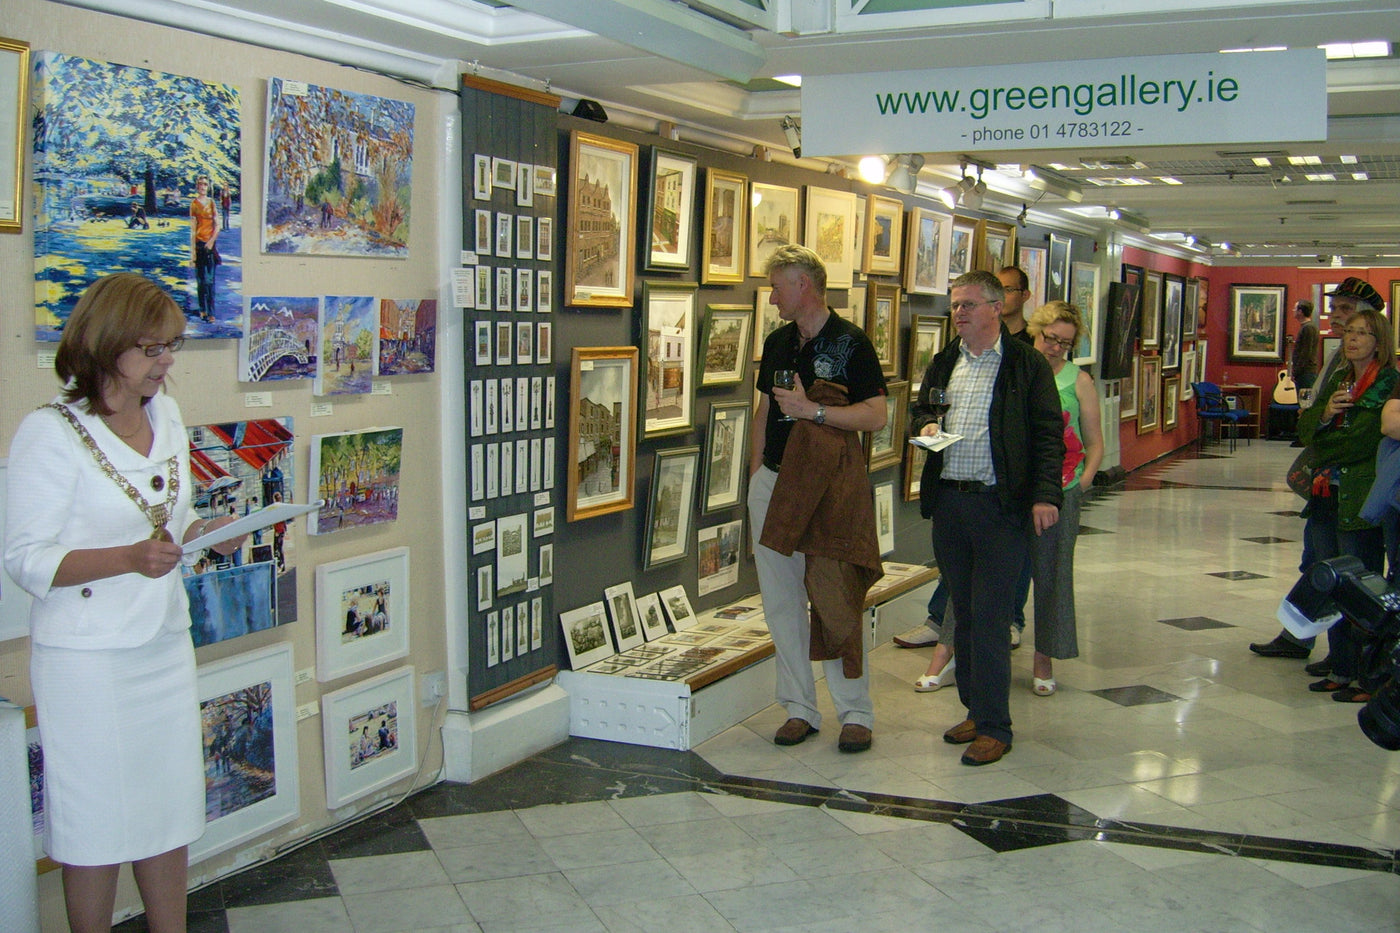 Lord Mayor Emer Costello opening Dublin exhibition. 2009 - Green Gallery